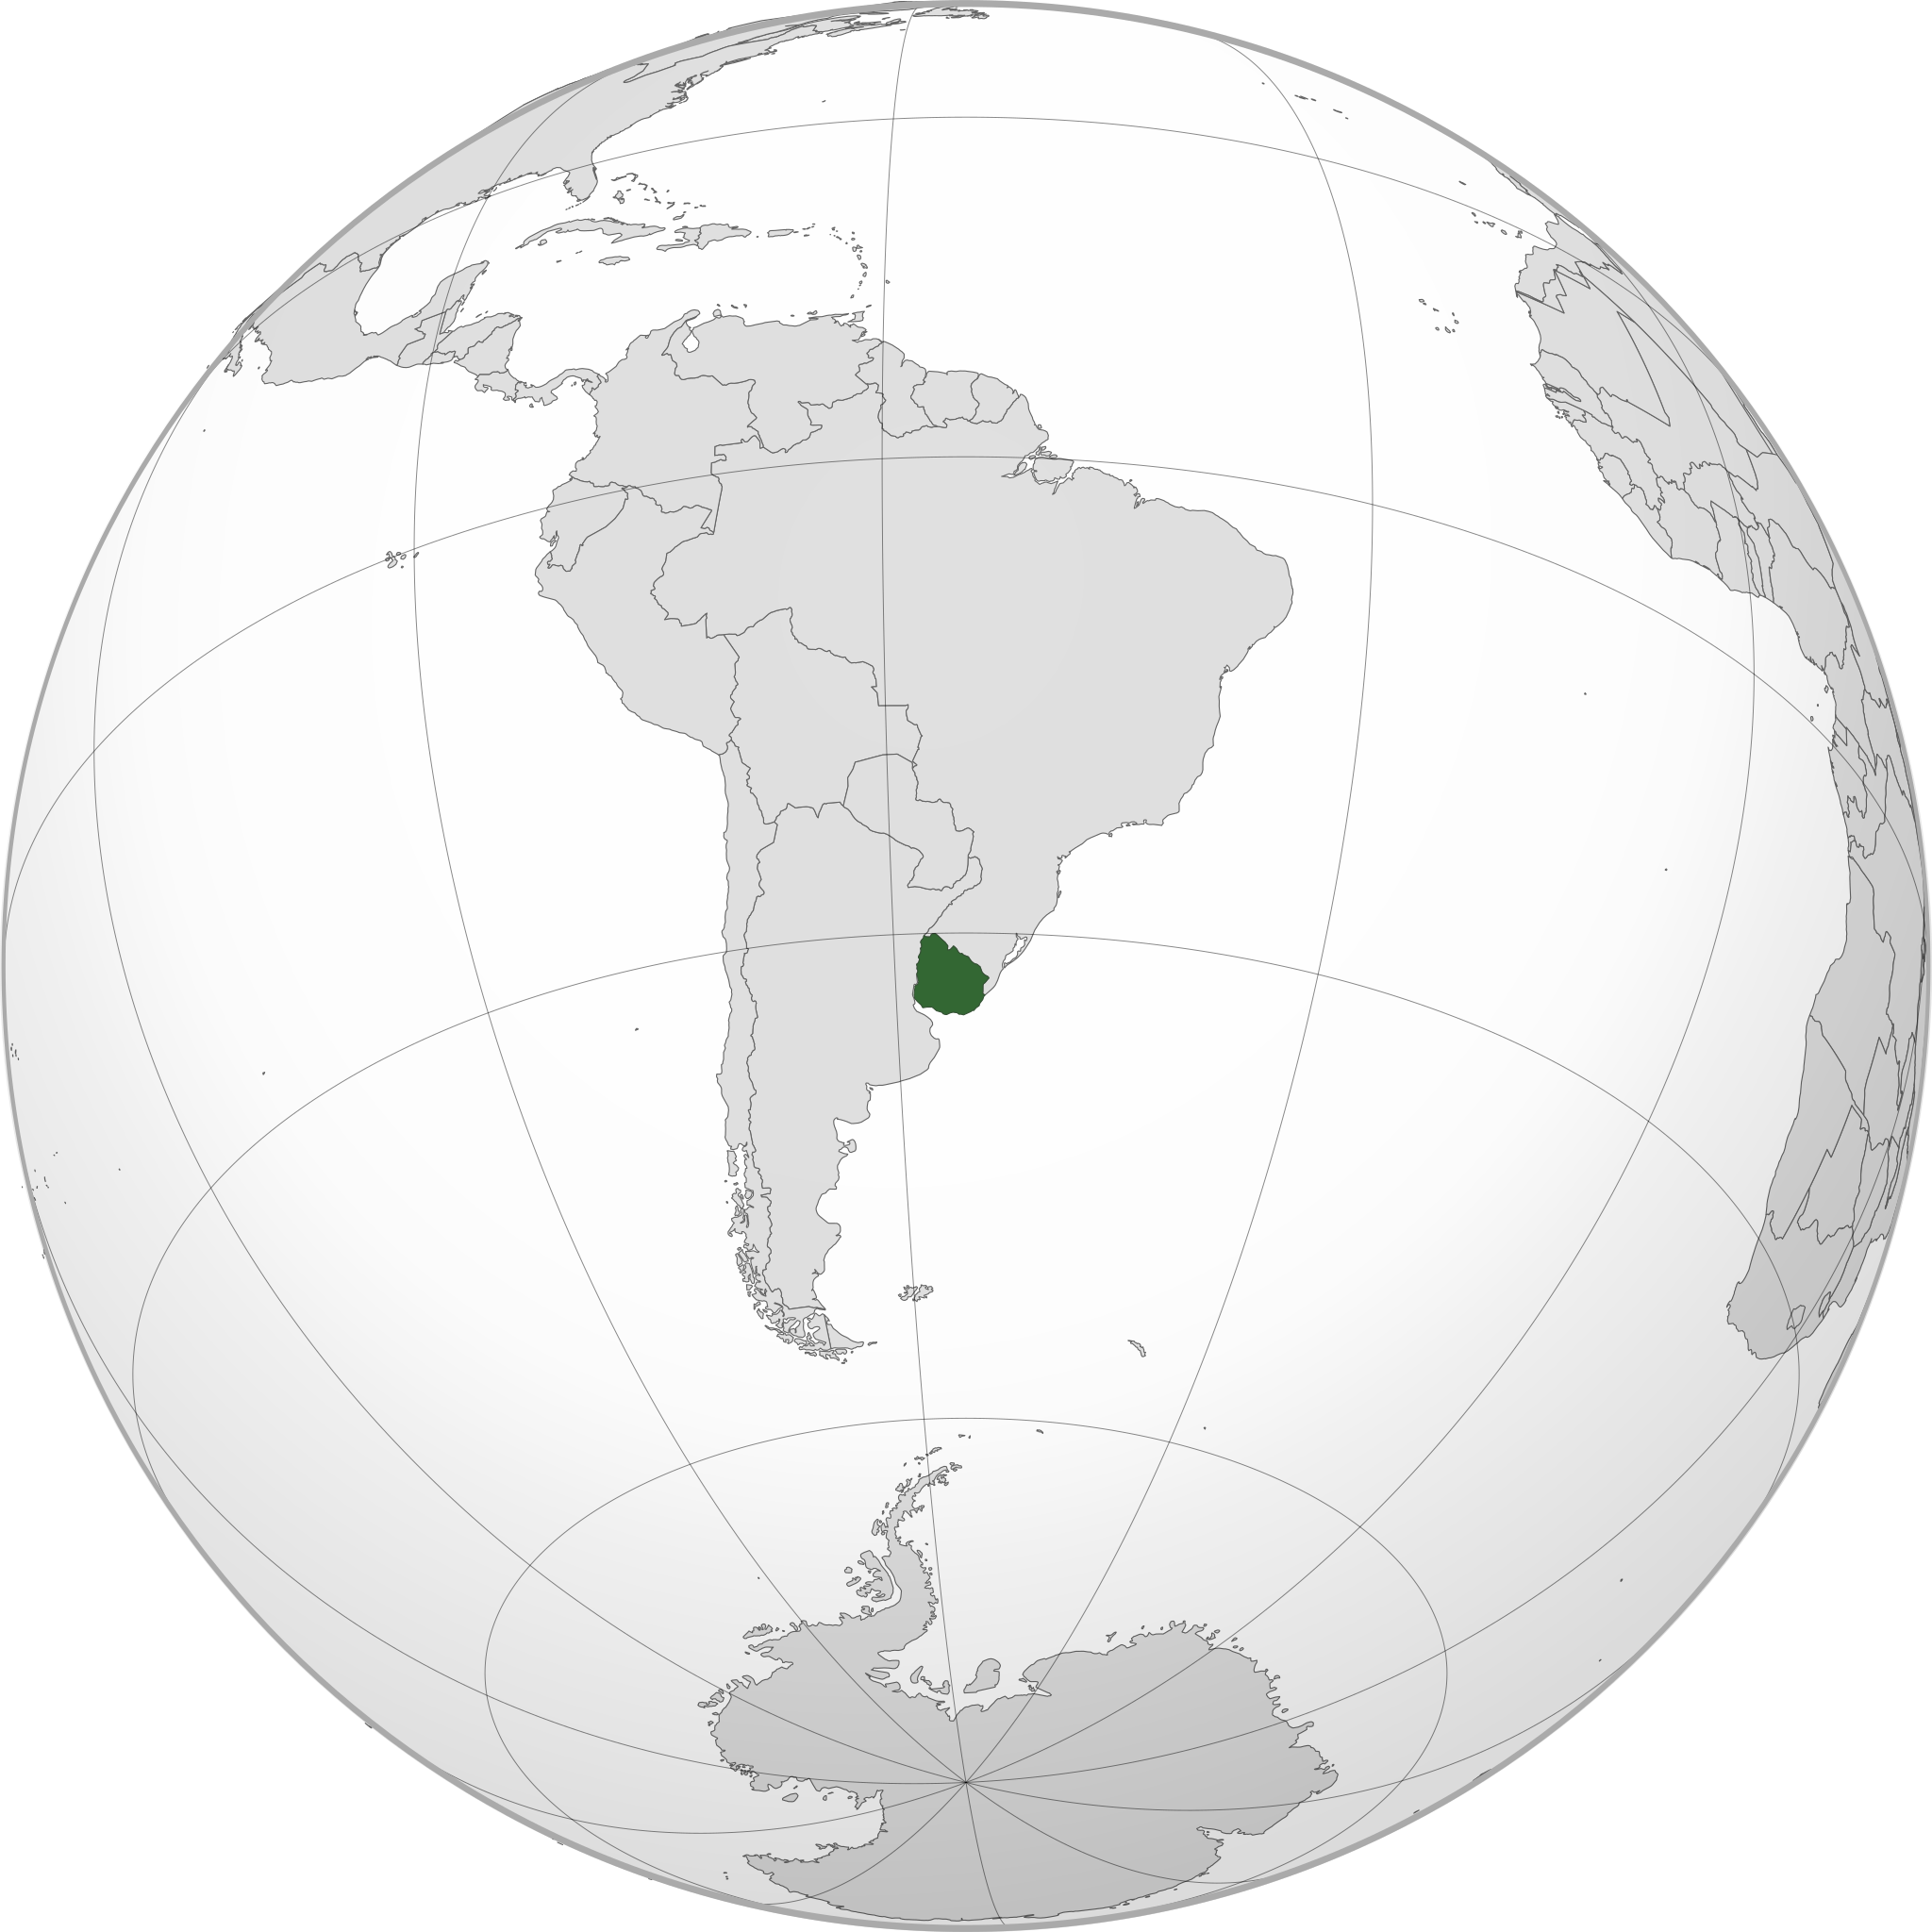 Uruguay is a small country east of Argentina and south of Brazil.